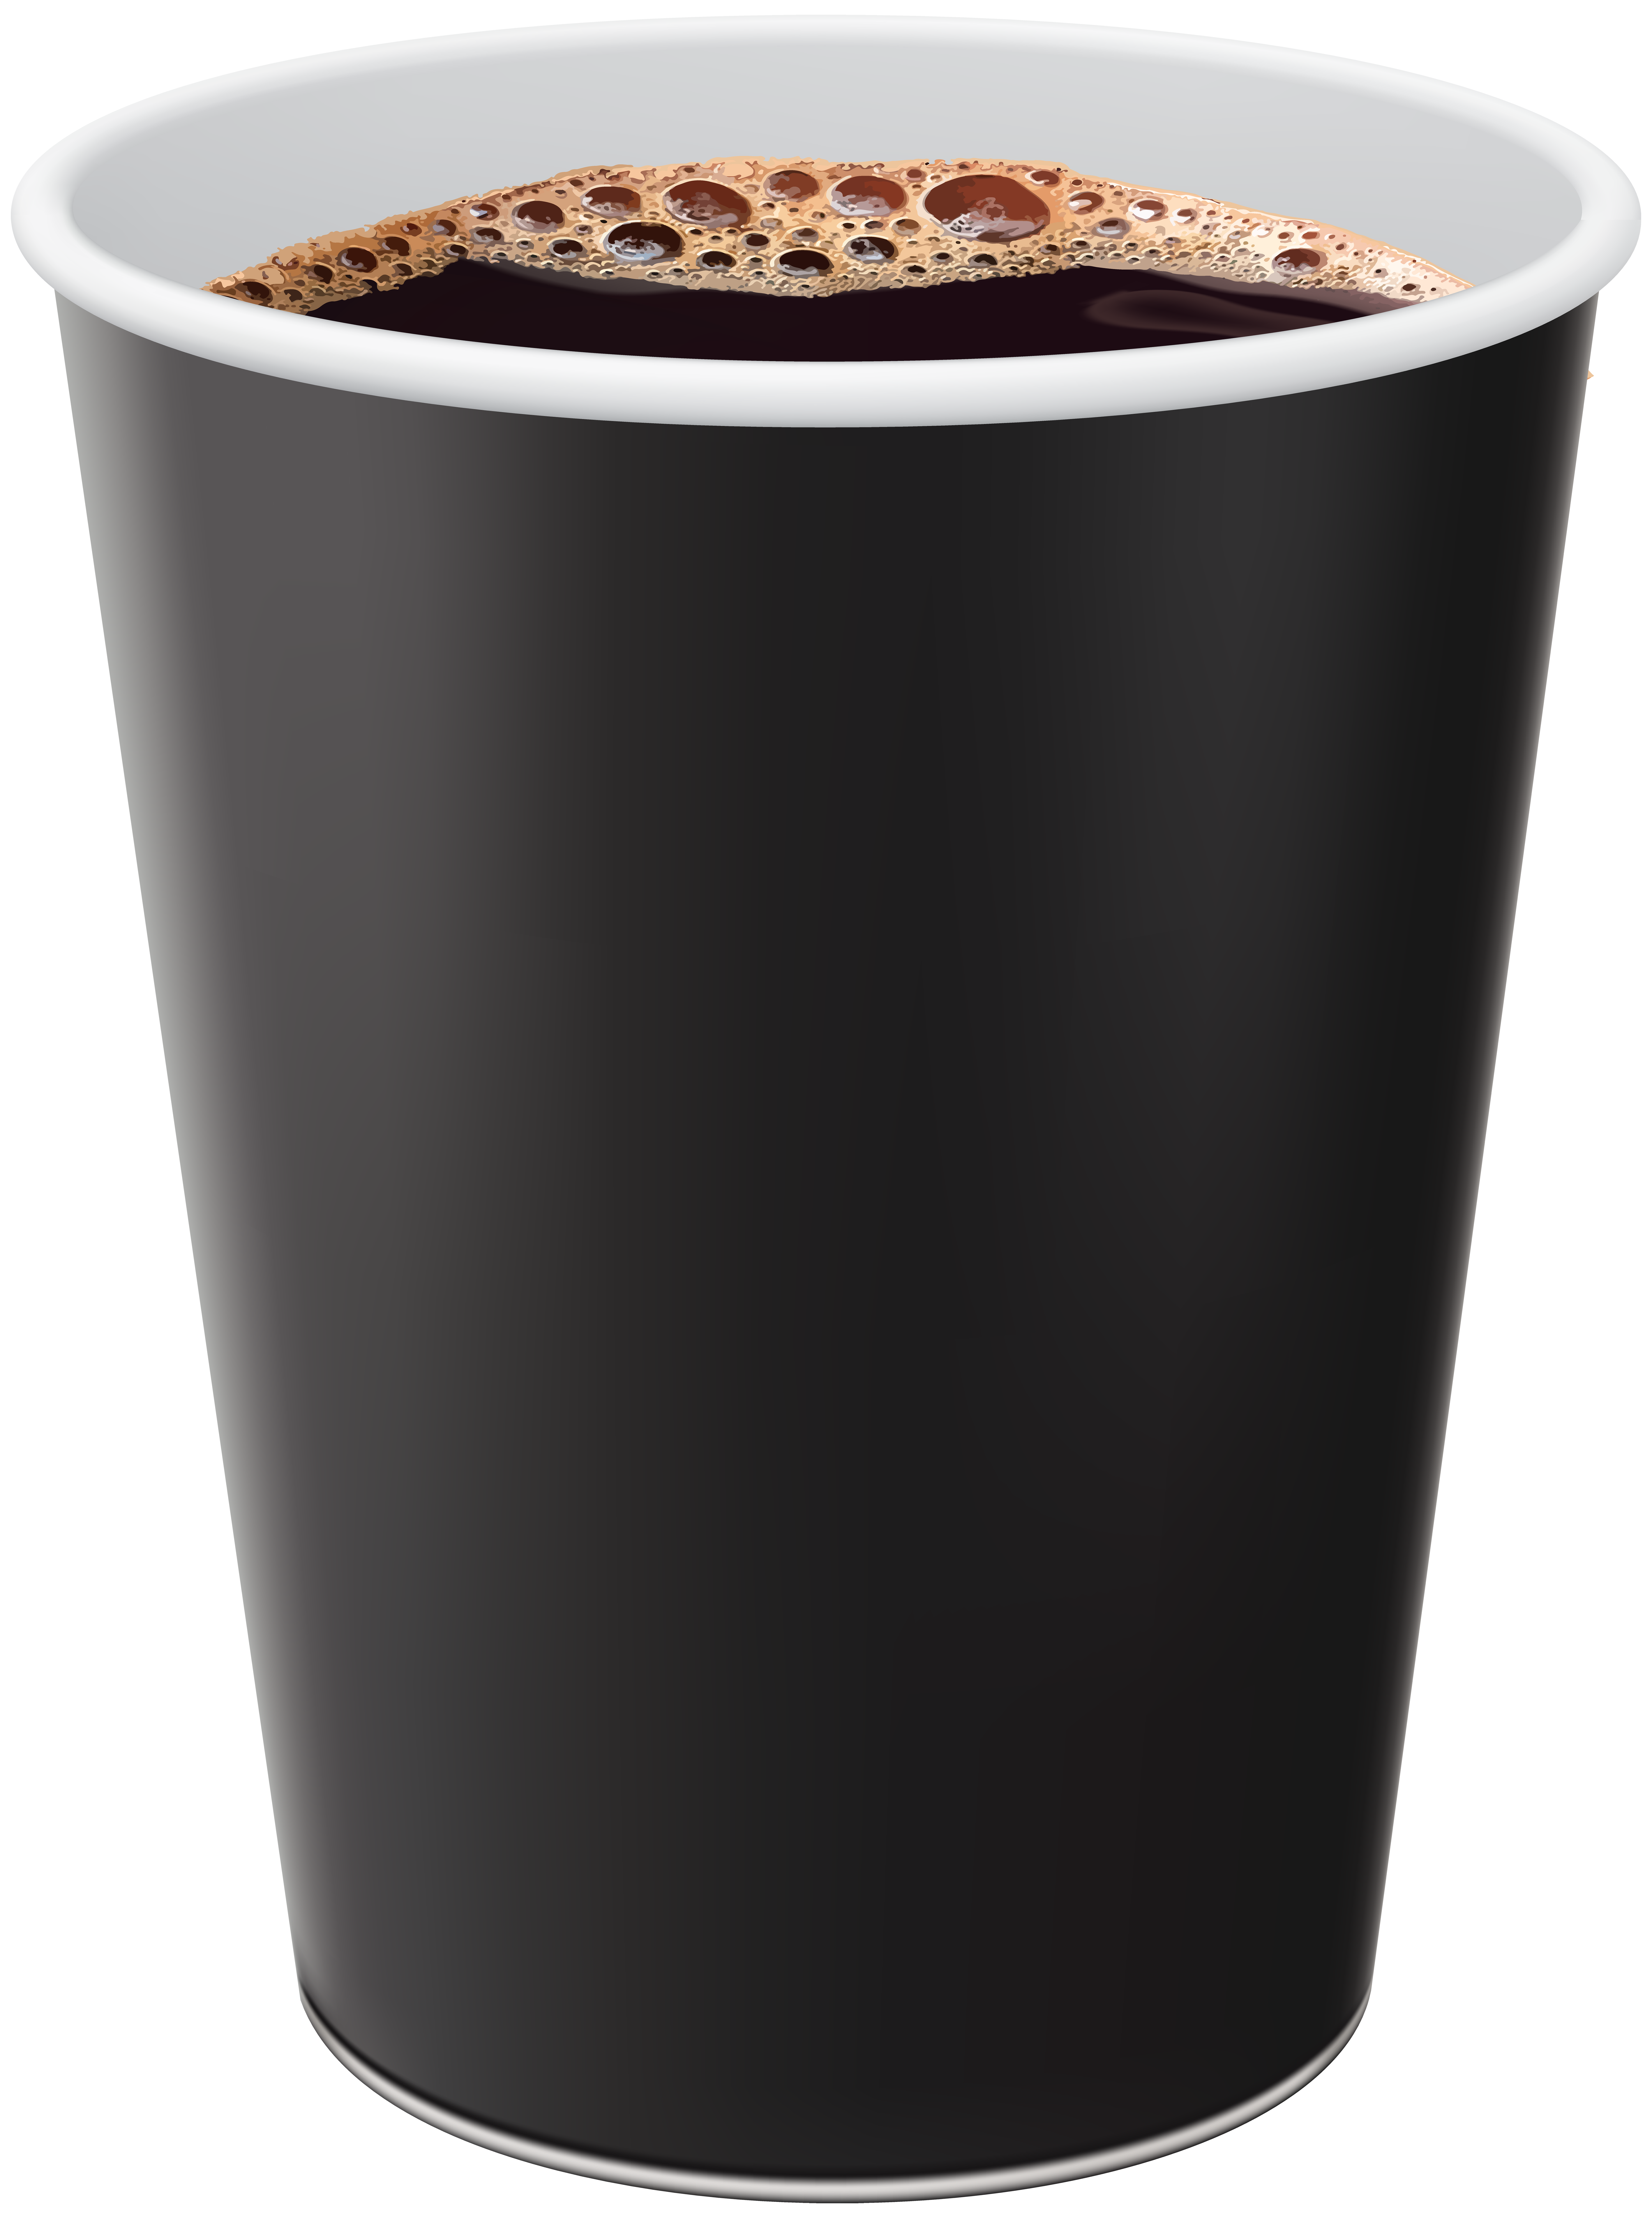 Coffee Cup Espresso Latte Takeaway Cafe PNG Image